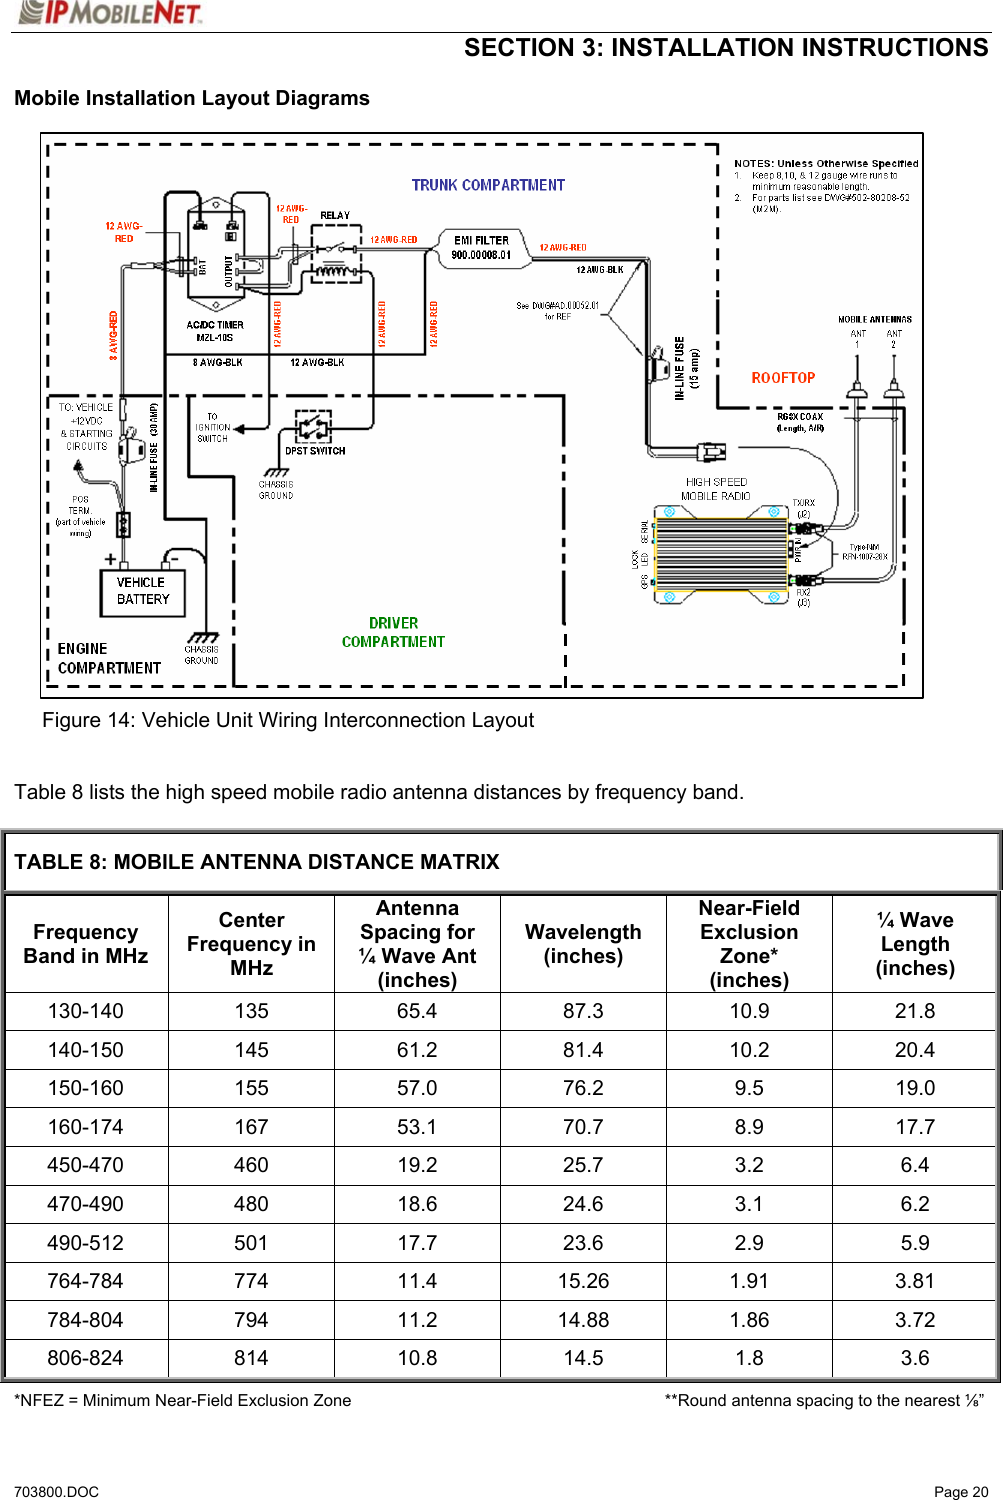  SECTION 3: INSTALLATION INSTRUCTIONS  703800.DOC   Page 20 Mobile Installation Layout Diagrams                              Figure 14: Vehicle Unit Wiring Interconnection Layout   Table 8 lists the high speed mobile radio antenna distances by frequency band.  TABLE 8: MOBILE ANTENNA DISTANCE MATRIX Frequency Band in MHz Center Frequency in MHz Antenna Spacing for ¼ Wave Ant (inches) Wavelength (inches) Near-Field Exclusion Zone* (inches) ¼ Wave Length (inches) 130-140 135  65.4  87.3  10.9  21.8 140-150 145  61.2  81.4  10.2  20.4 150-160 155 57.0 76.2 9.5 19.0 160-174 167 53.1 70.7 8.9 17.7 450-470 460  19.2  25.7  3.2  6.4 470-490 480  18.6  24.6  3.1  6.2 490-512 501  17.7  23.6  2.9  5.9 764-784 774  11.4  15.26  1.91  3.81 784-804 794  11.2  14.88  1.86  3.72 806-824 814  10.8  14.5  1.8  3.6 *NFEZ = Minimum Near-Field Exclusion Zone                    **Round antenna spacing to the nearest ⅛” 